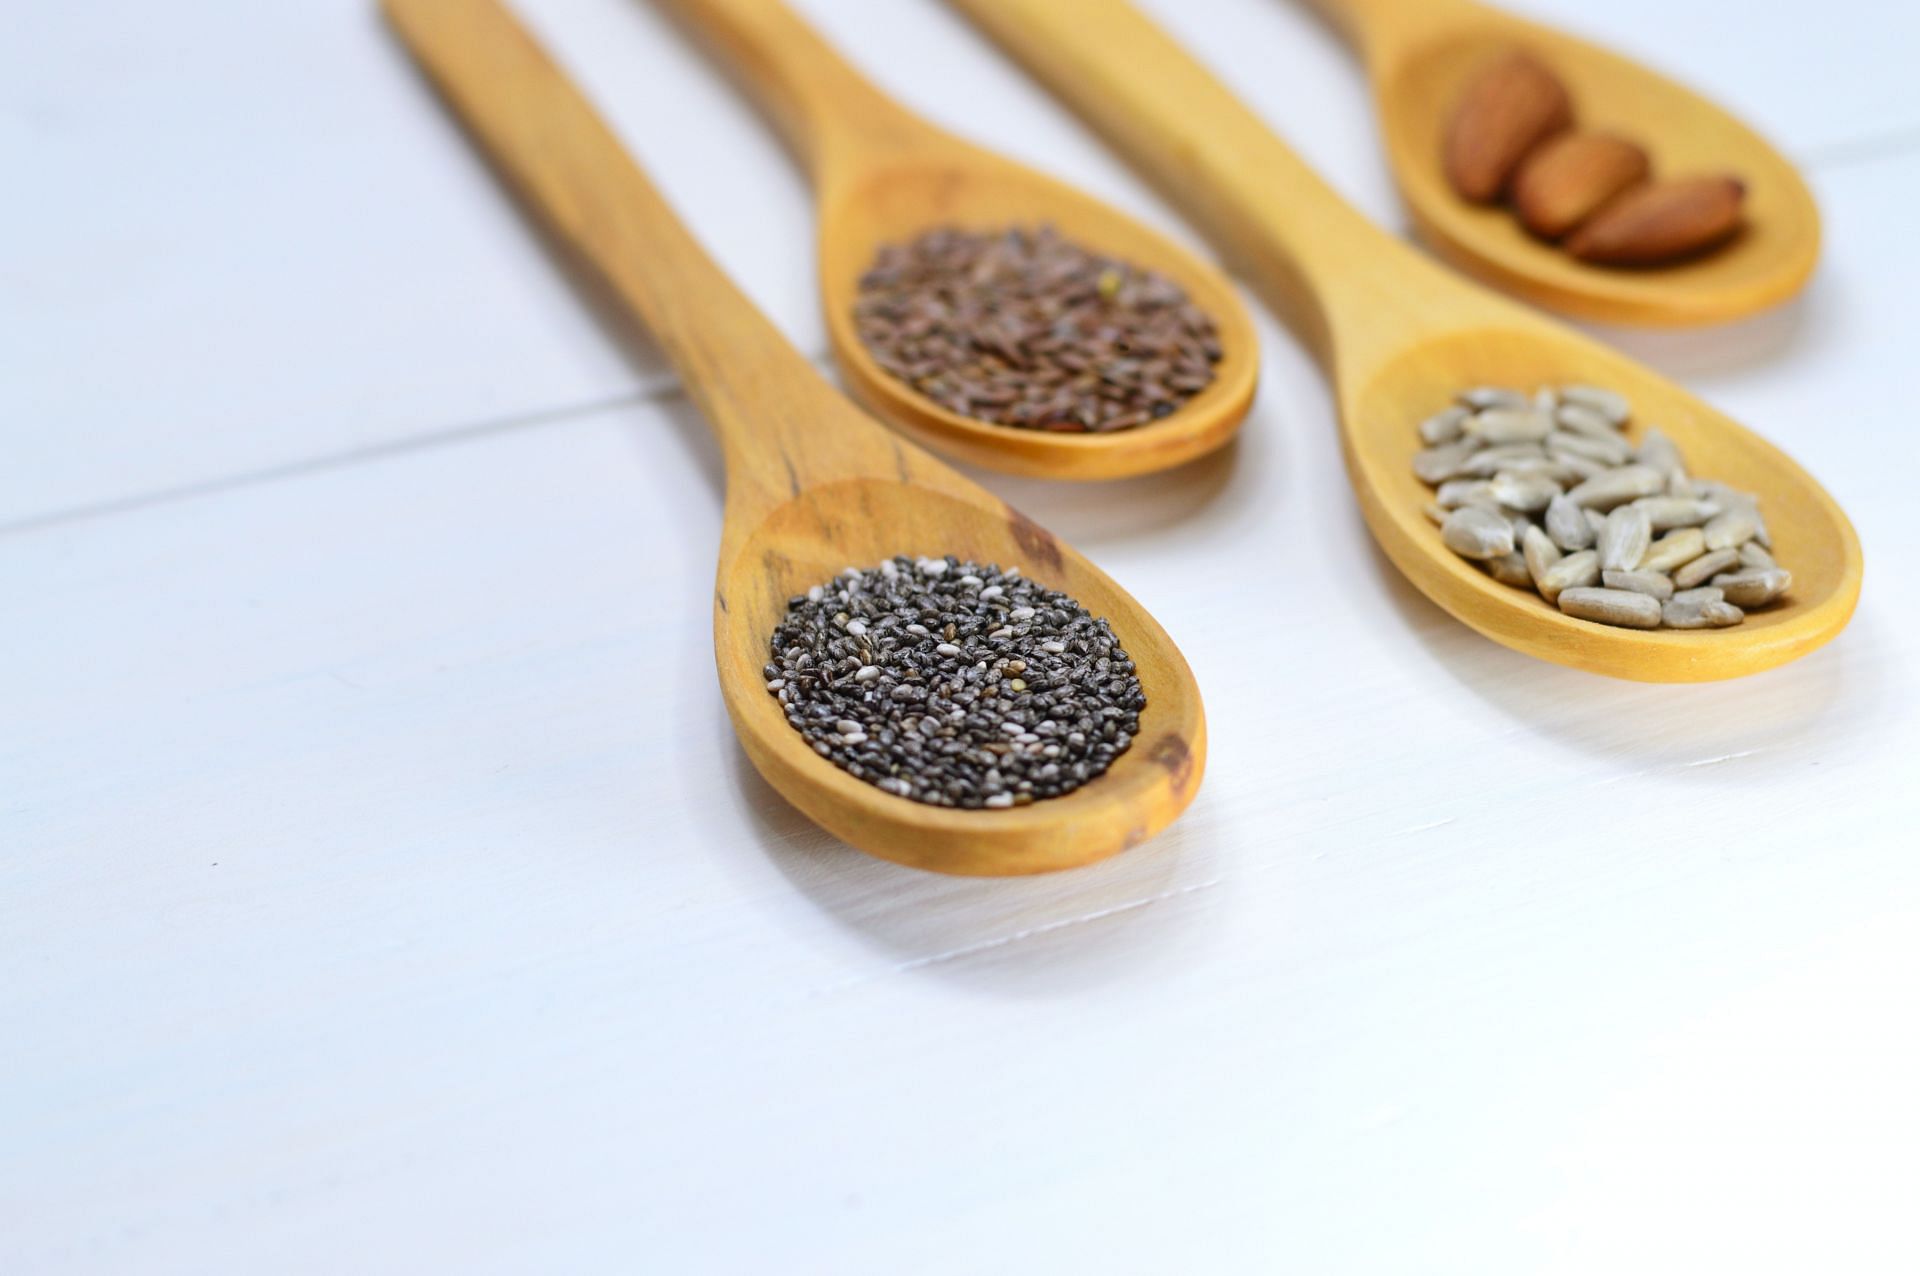 Sesame seeds, sunflower seeds, and pumpkin seeds are good sources of copper (Image via Pexels)